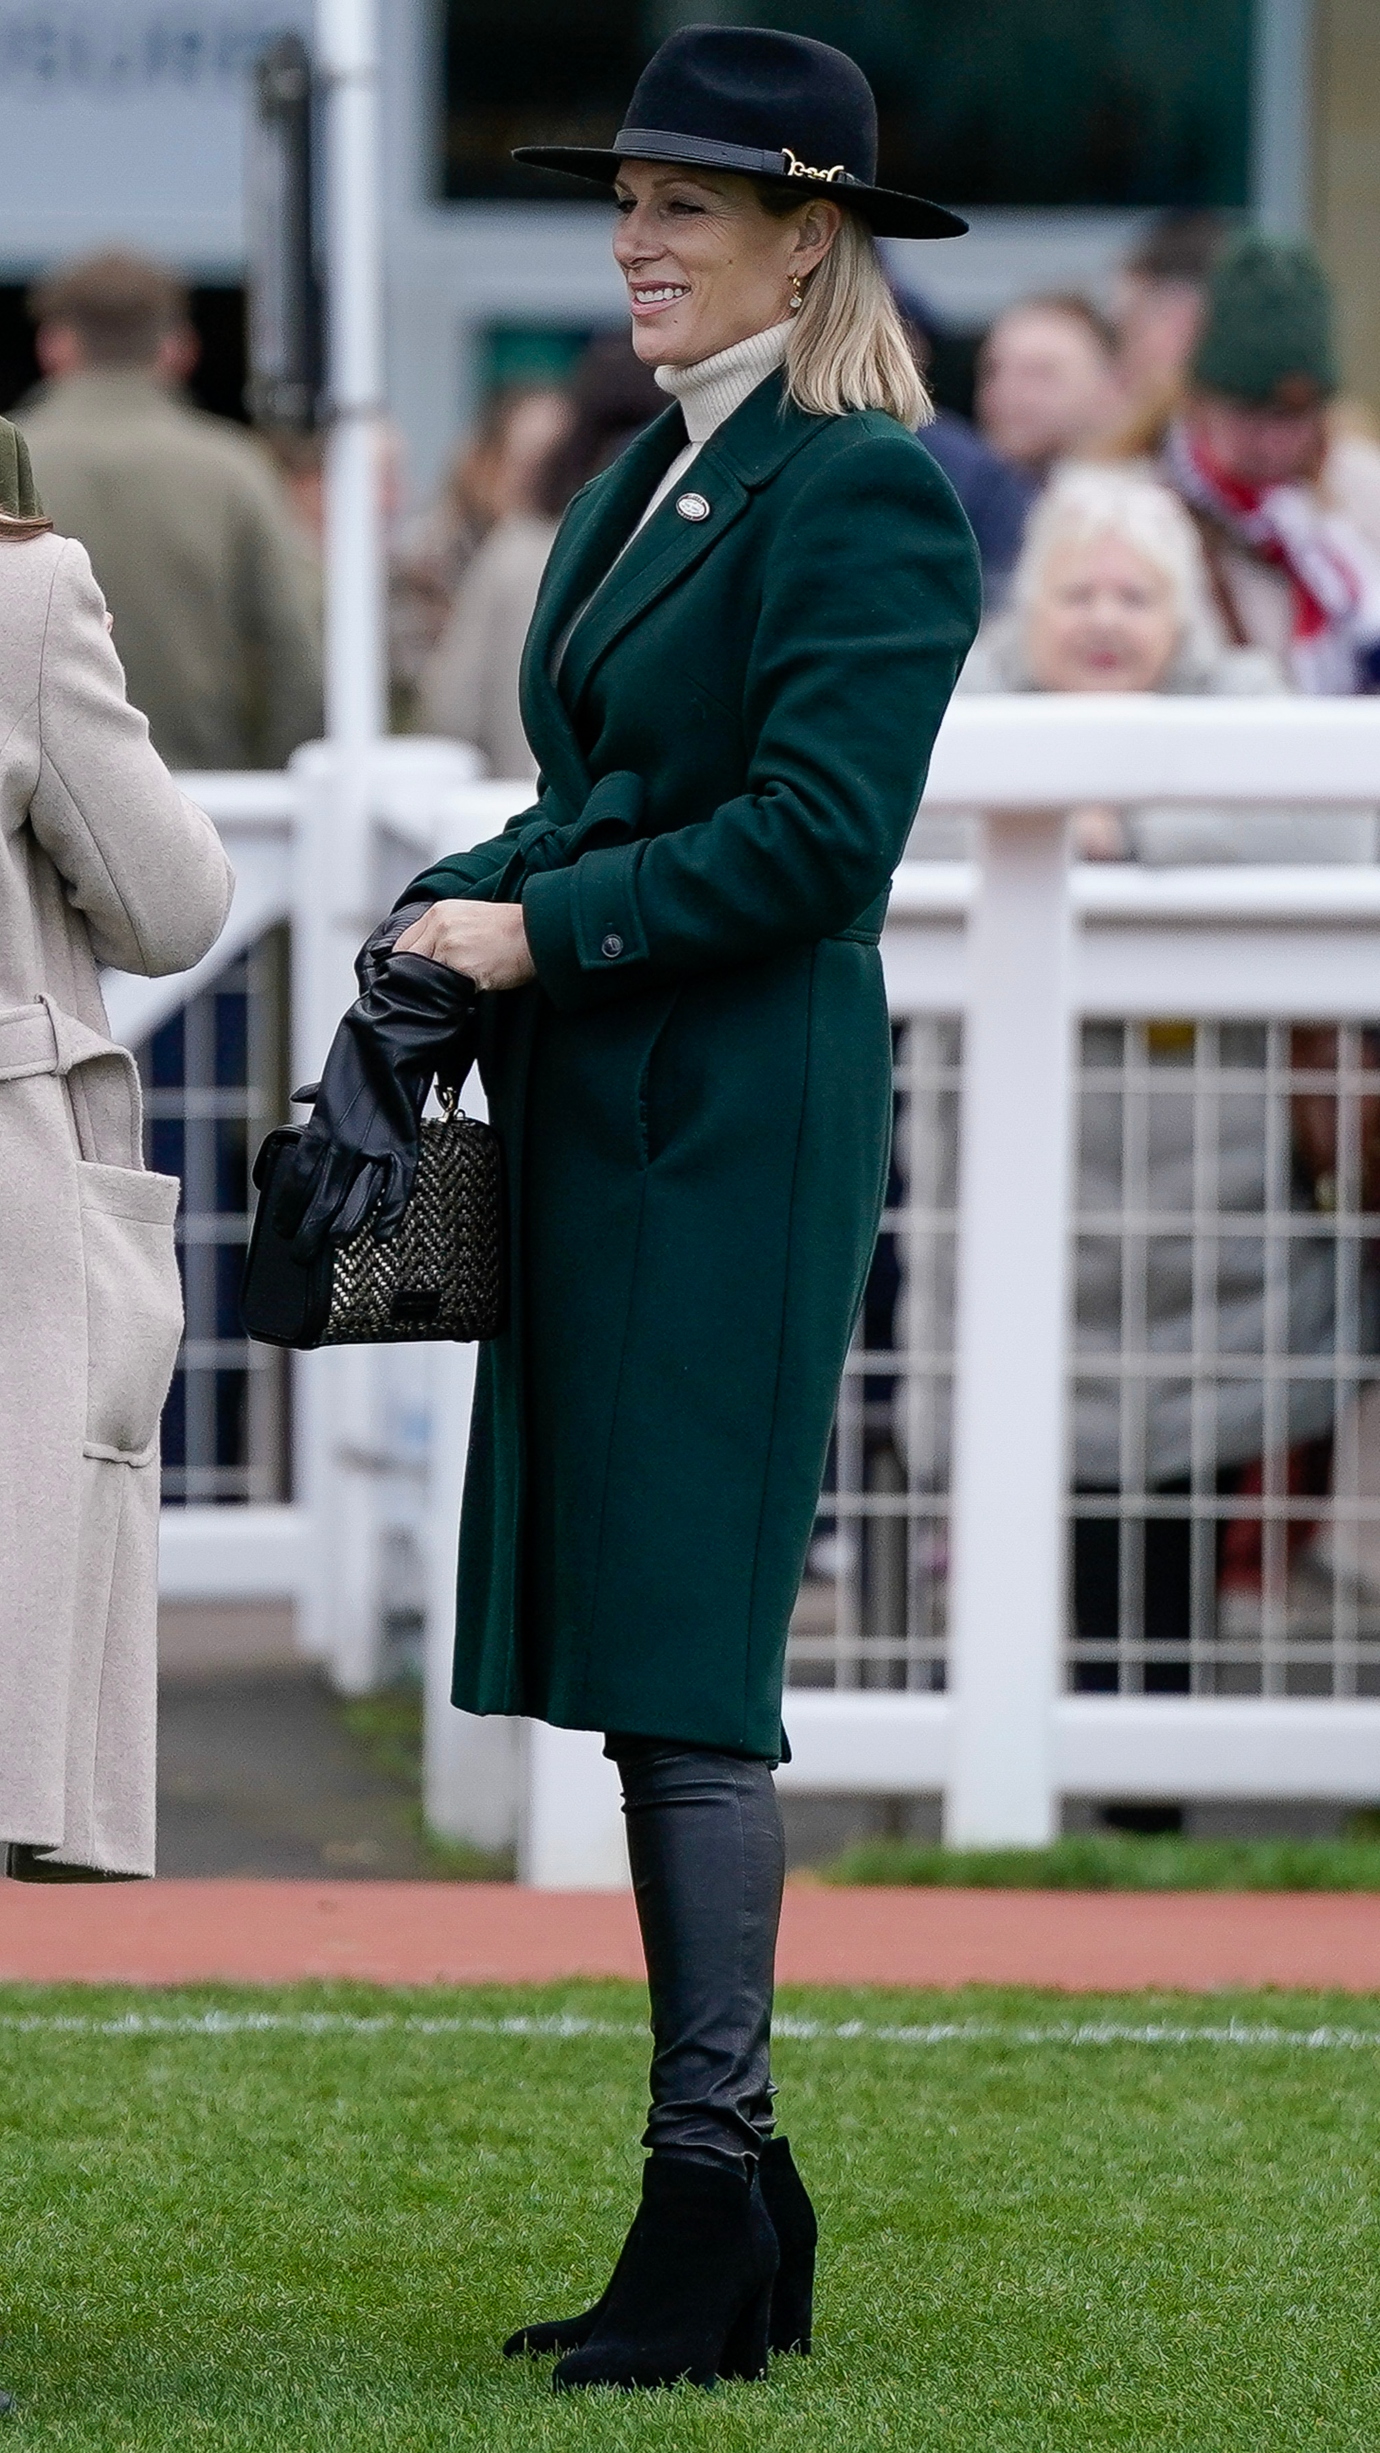 Zara Tindall's Reiss coat and woven bag are so sophisticated | Woman & Home